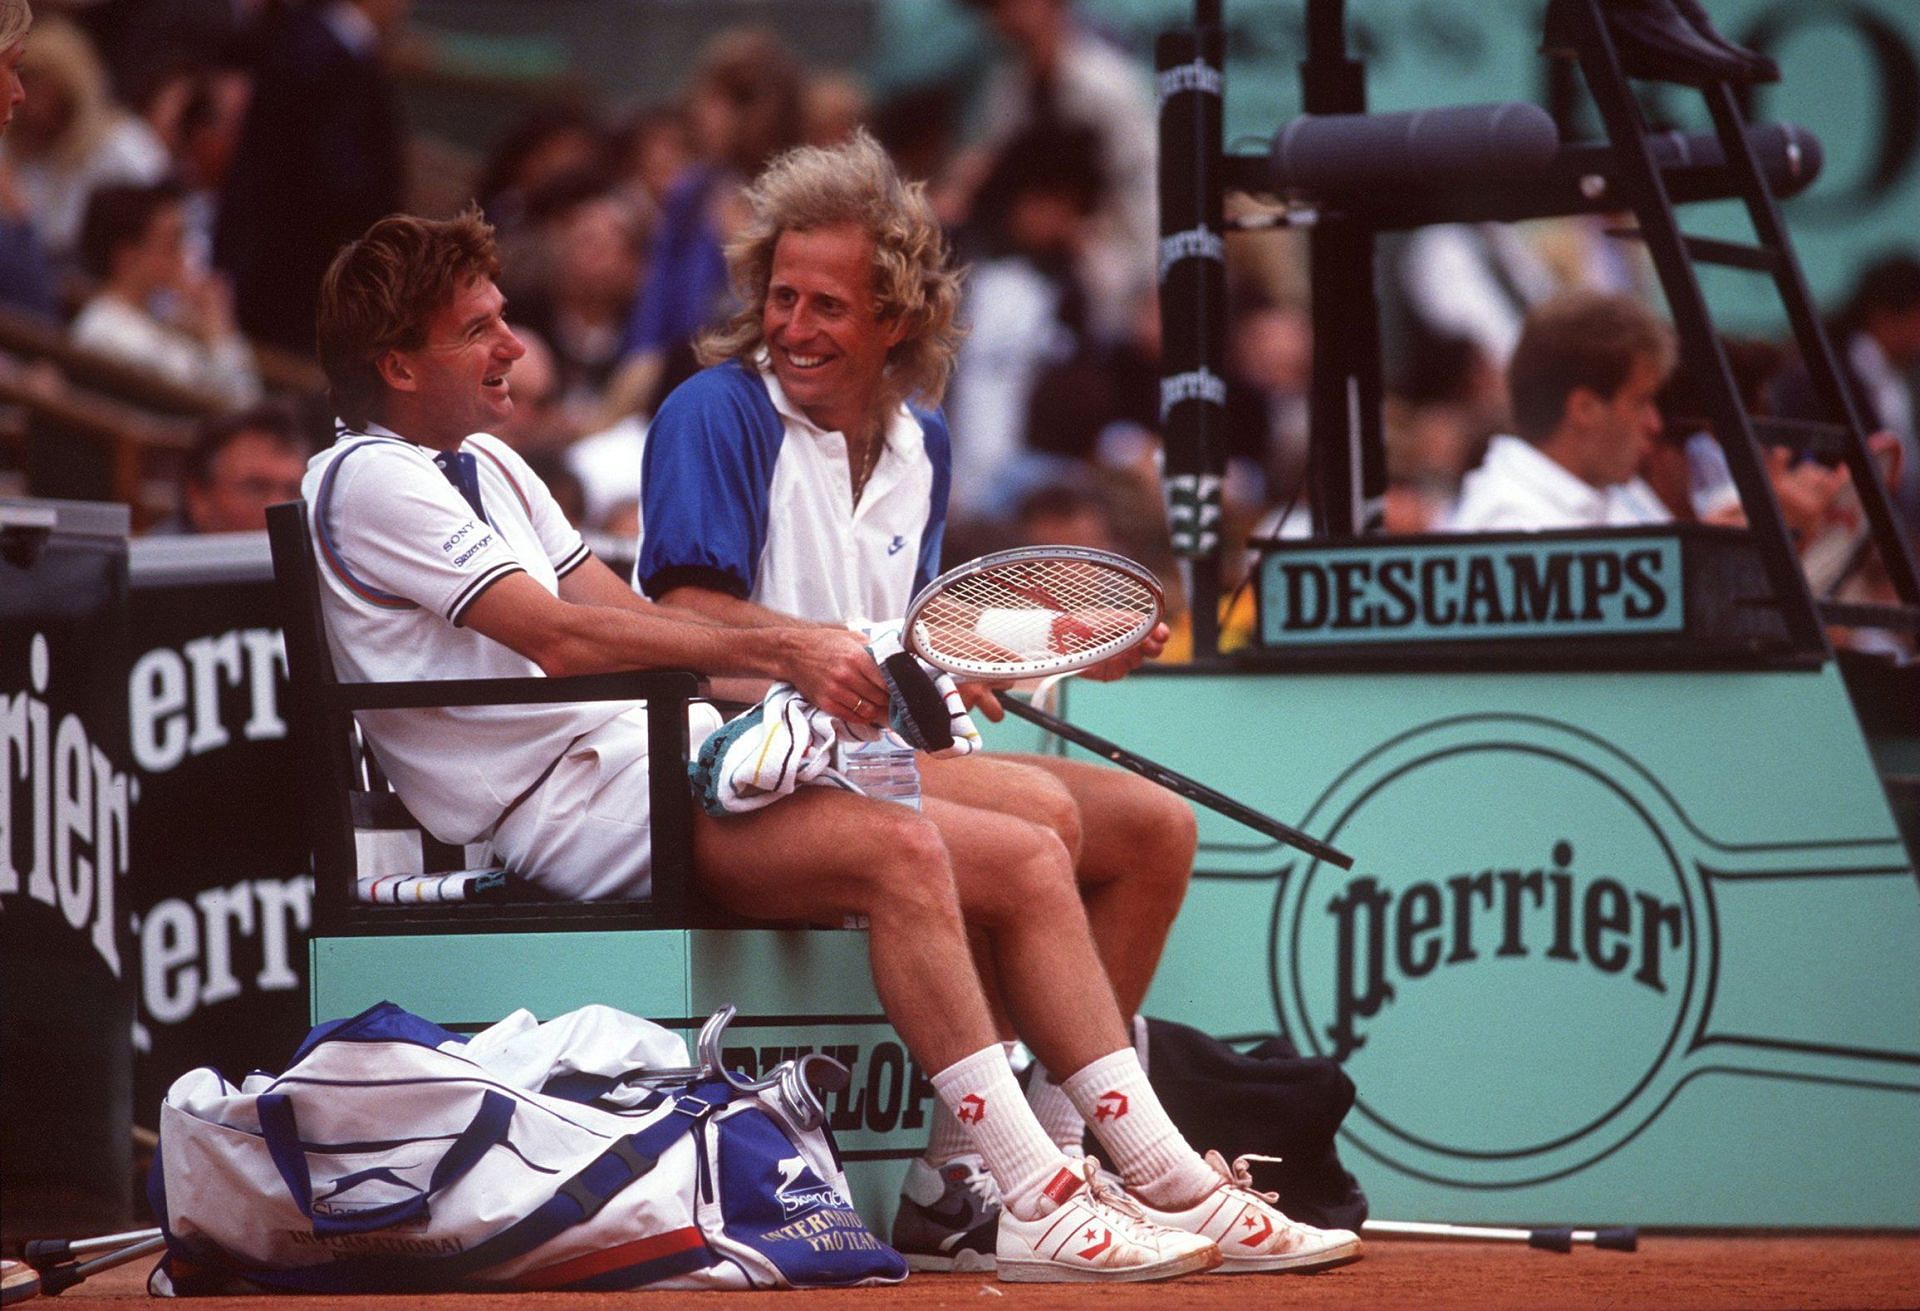 Jimmy Connors (L) and Vitas Gerulaitis (R) at the French Open